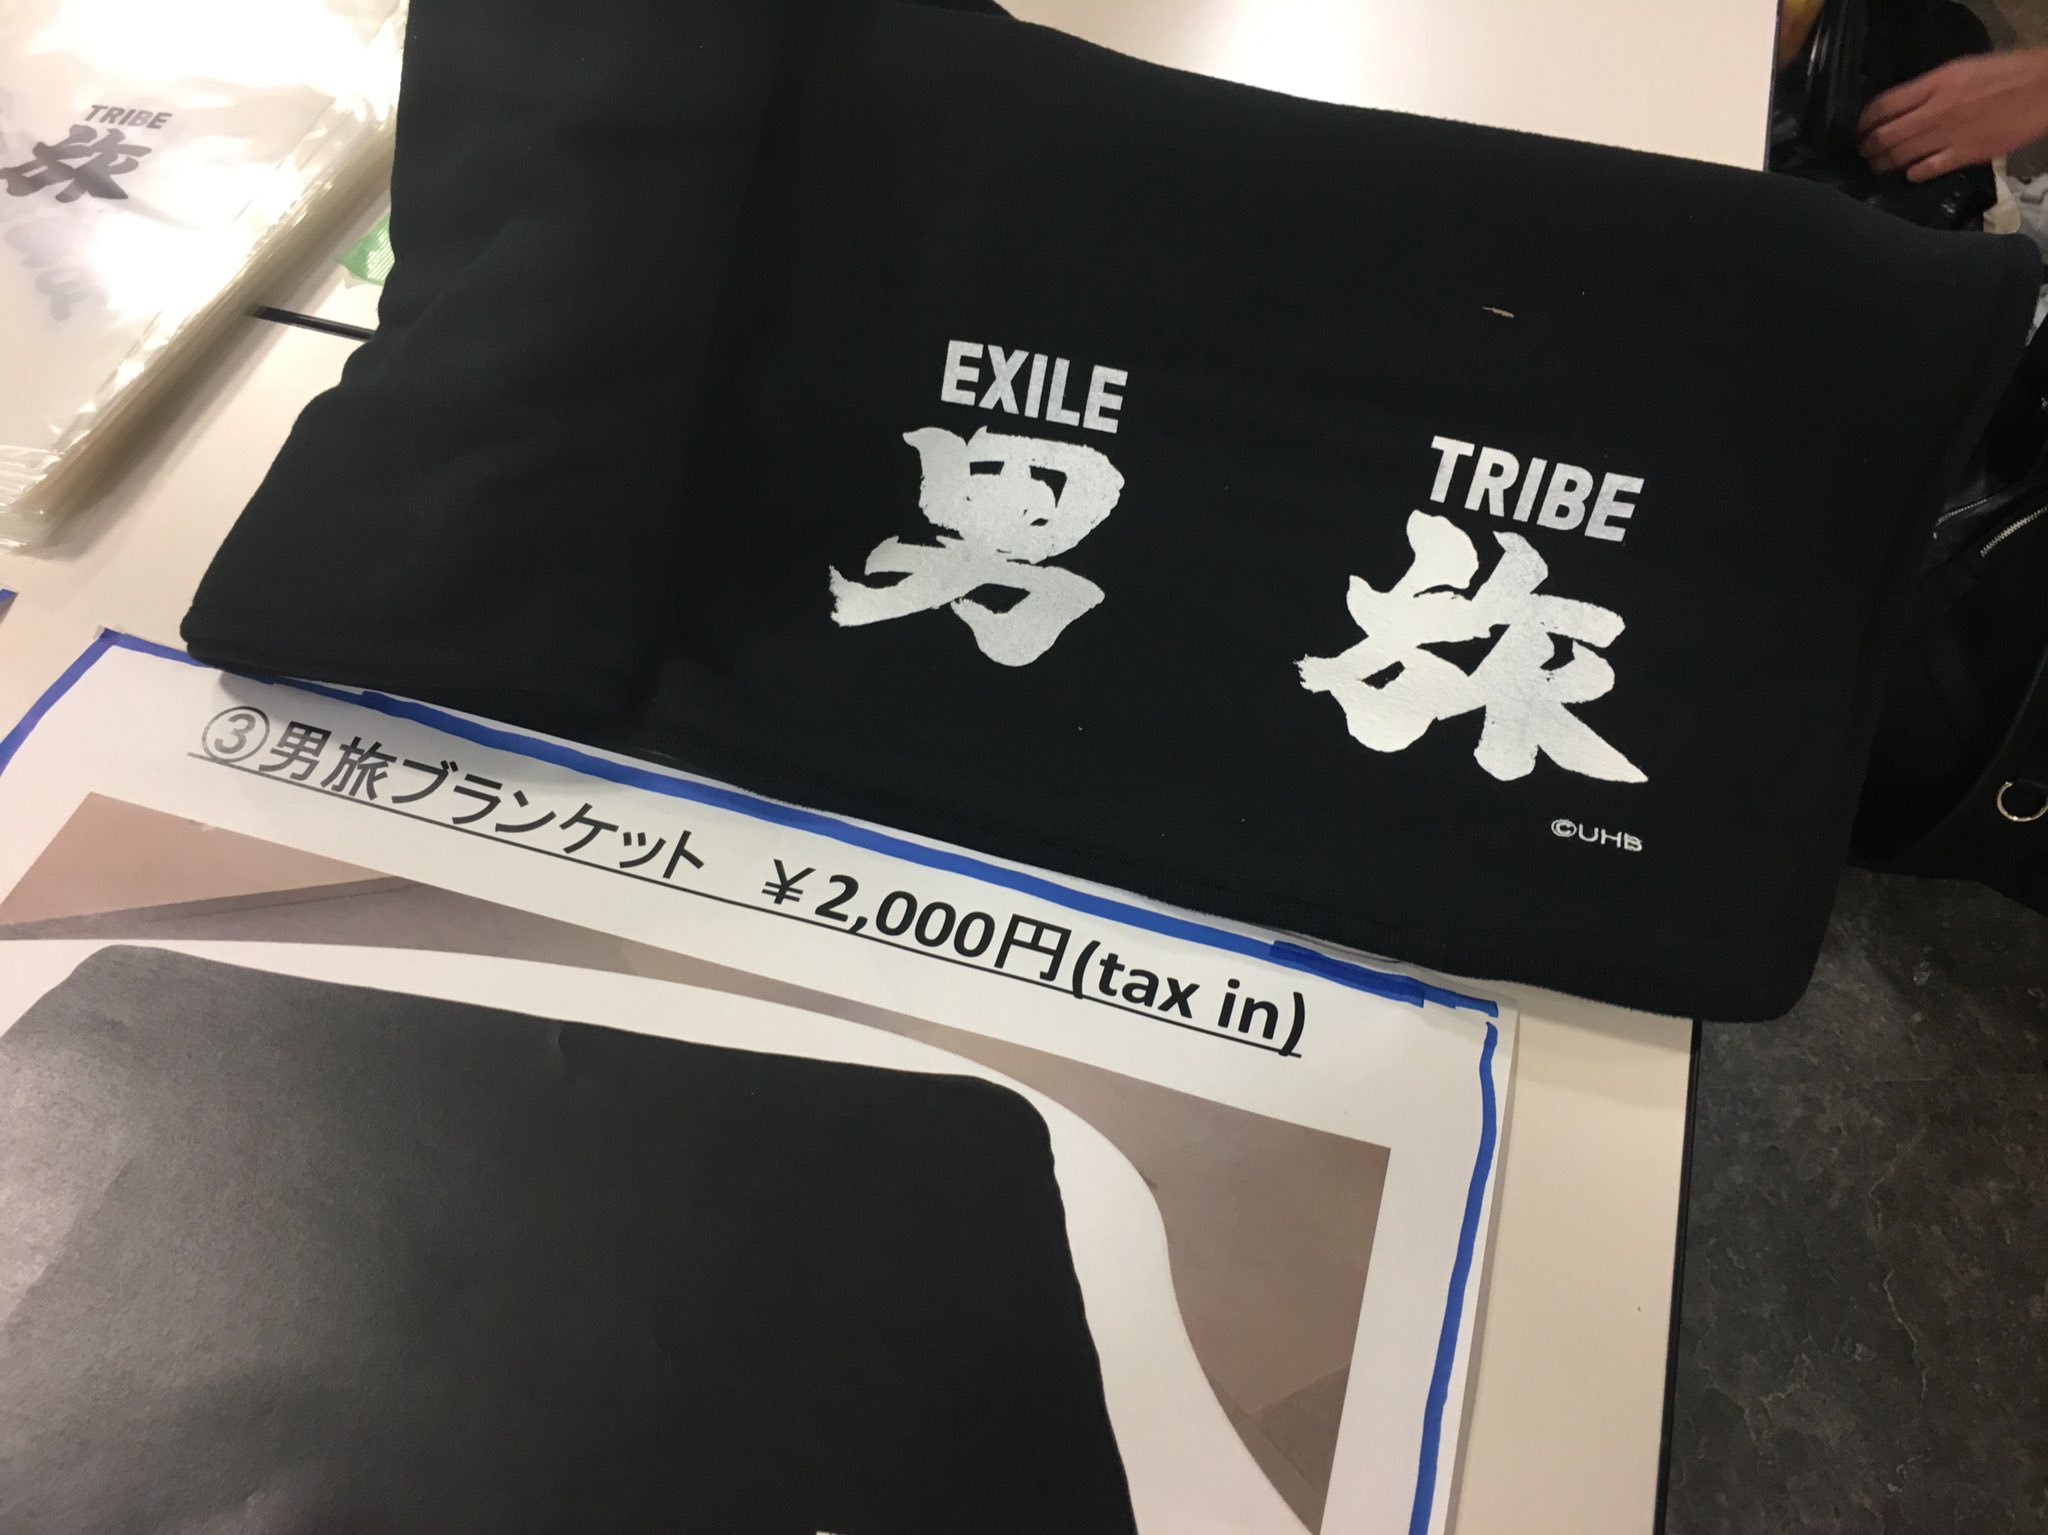 EXILE TRIBE 男旅 on X: 